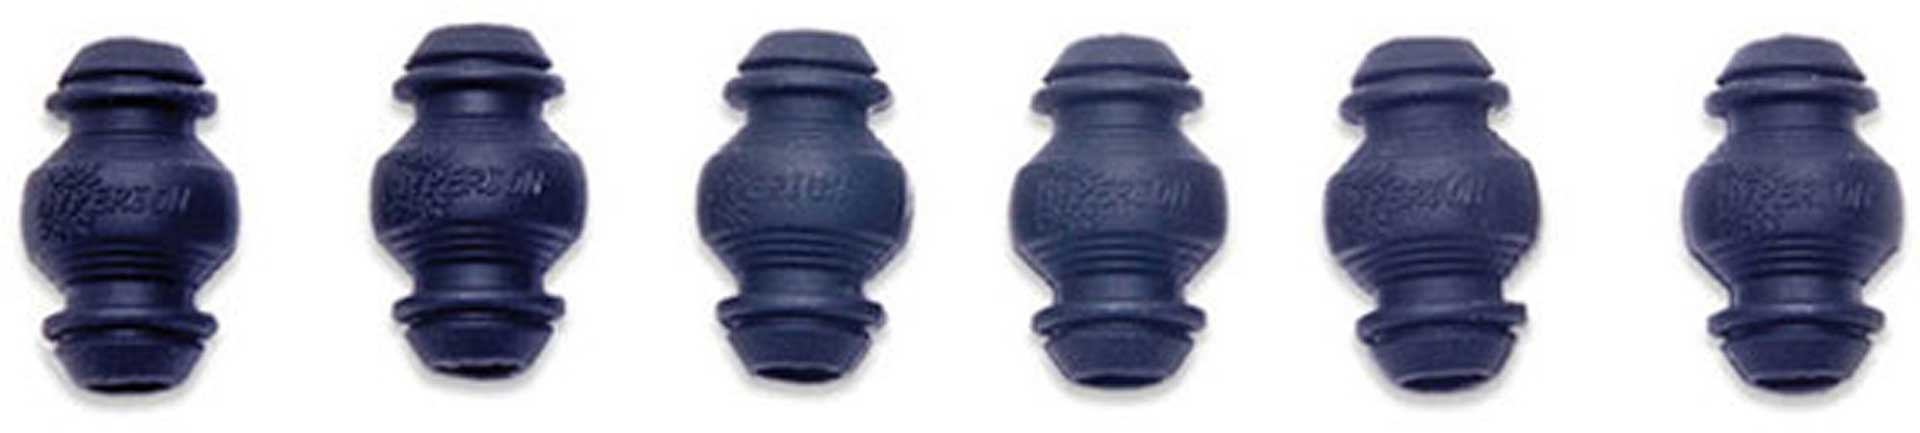 HYPERION VENGEANCE SILICONE DAMPENERS 6PCS.